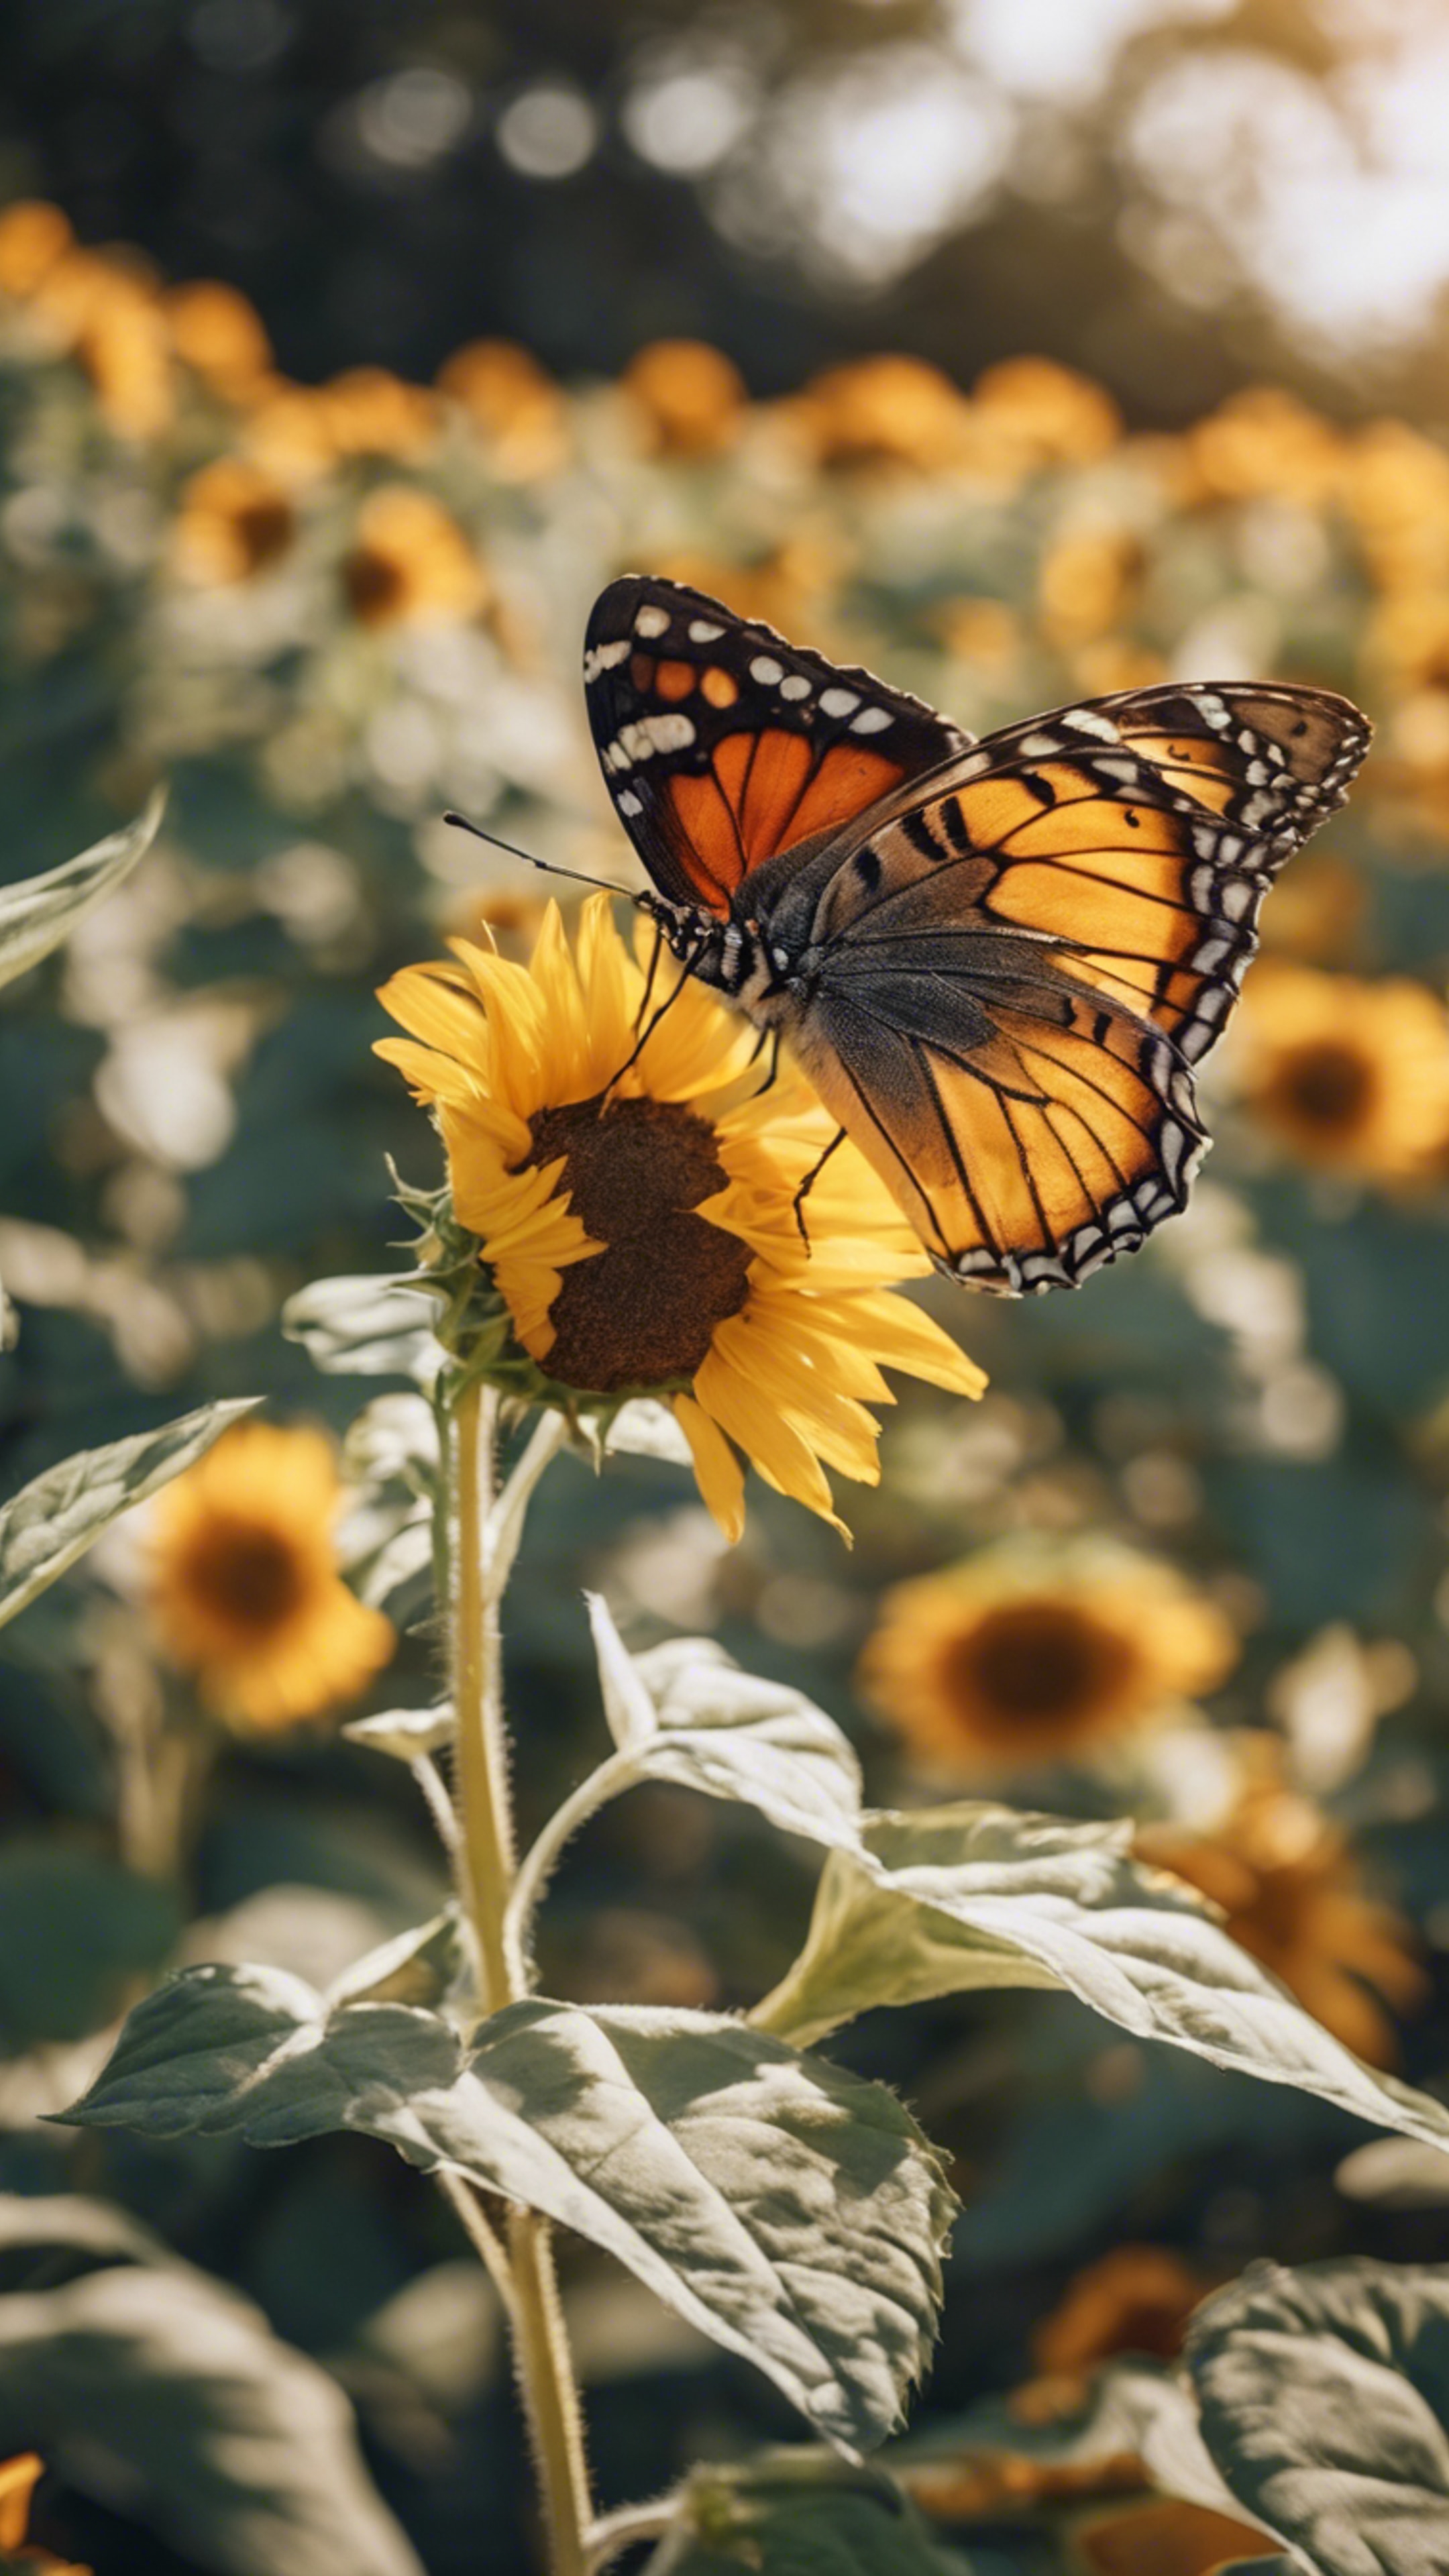 A vibrant butterfly resting on a sunflower in a bustling garden on a spring morning.壁紙[6c43cb3dbdfe44139401]